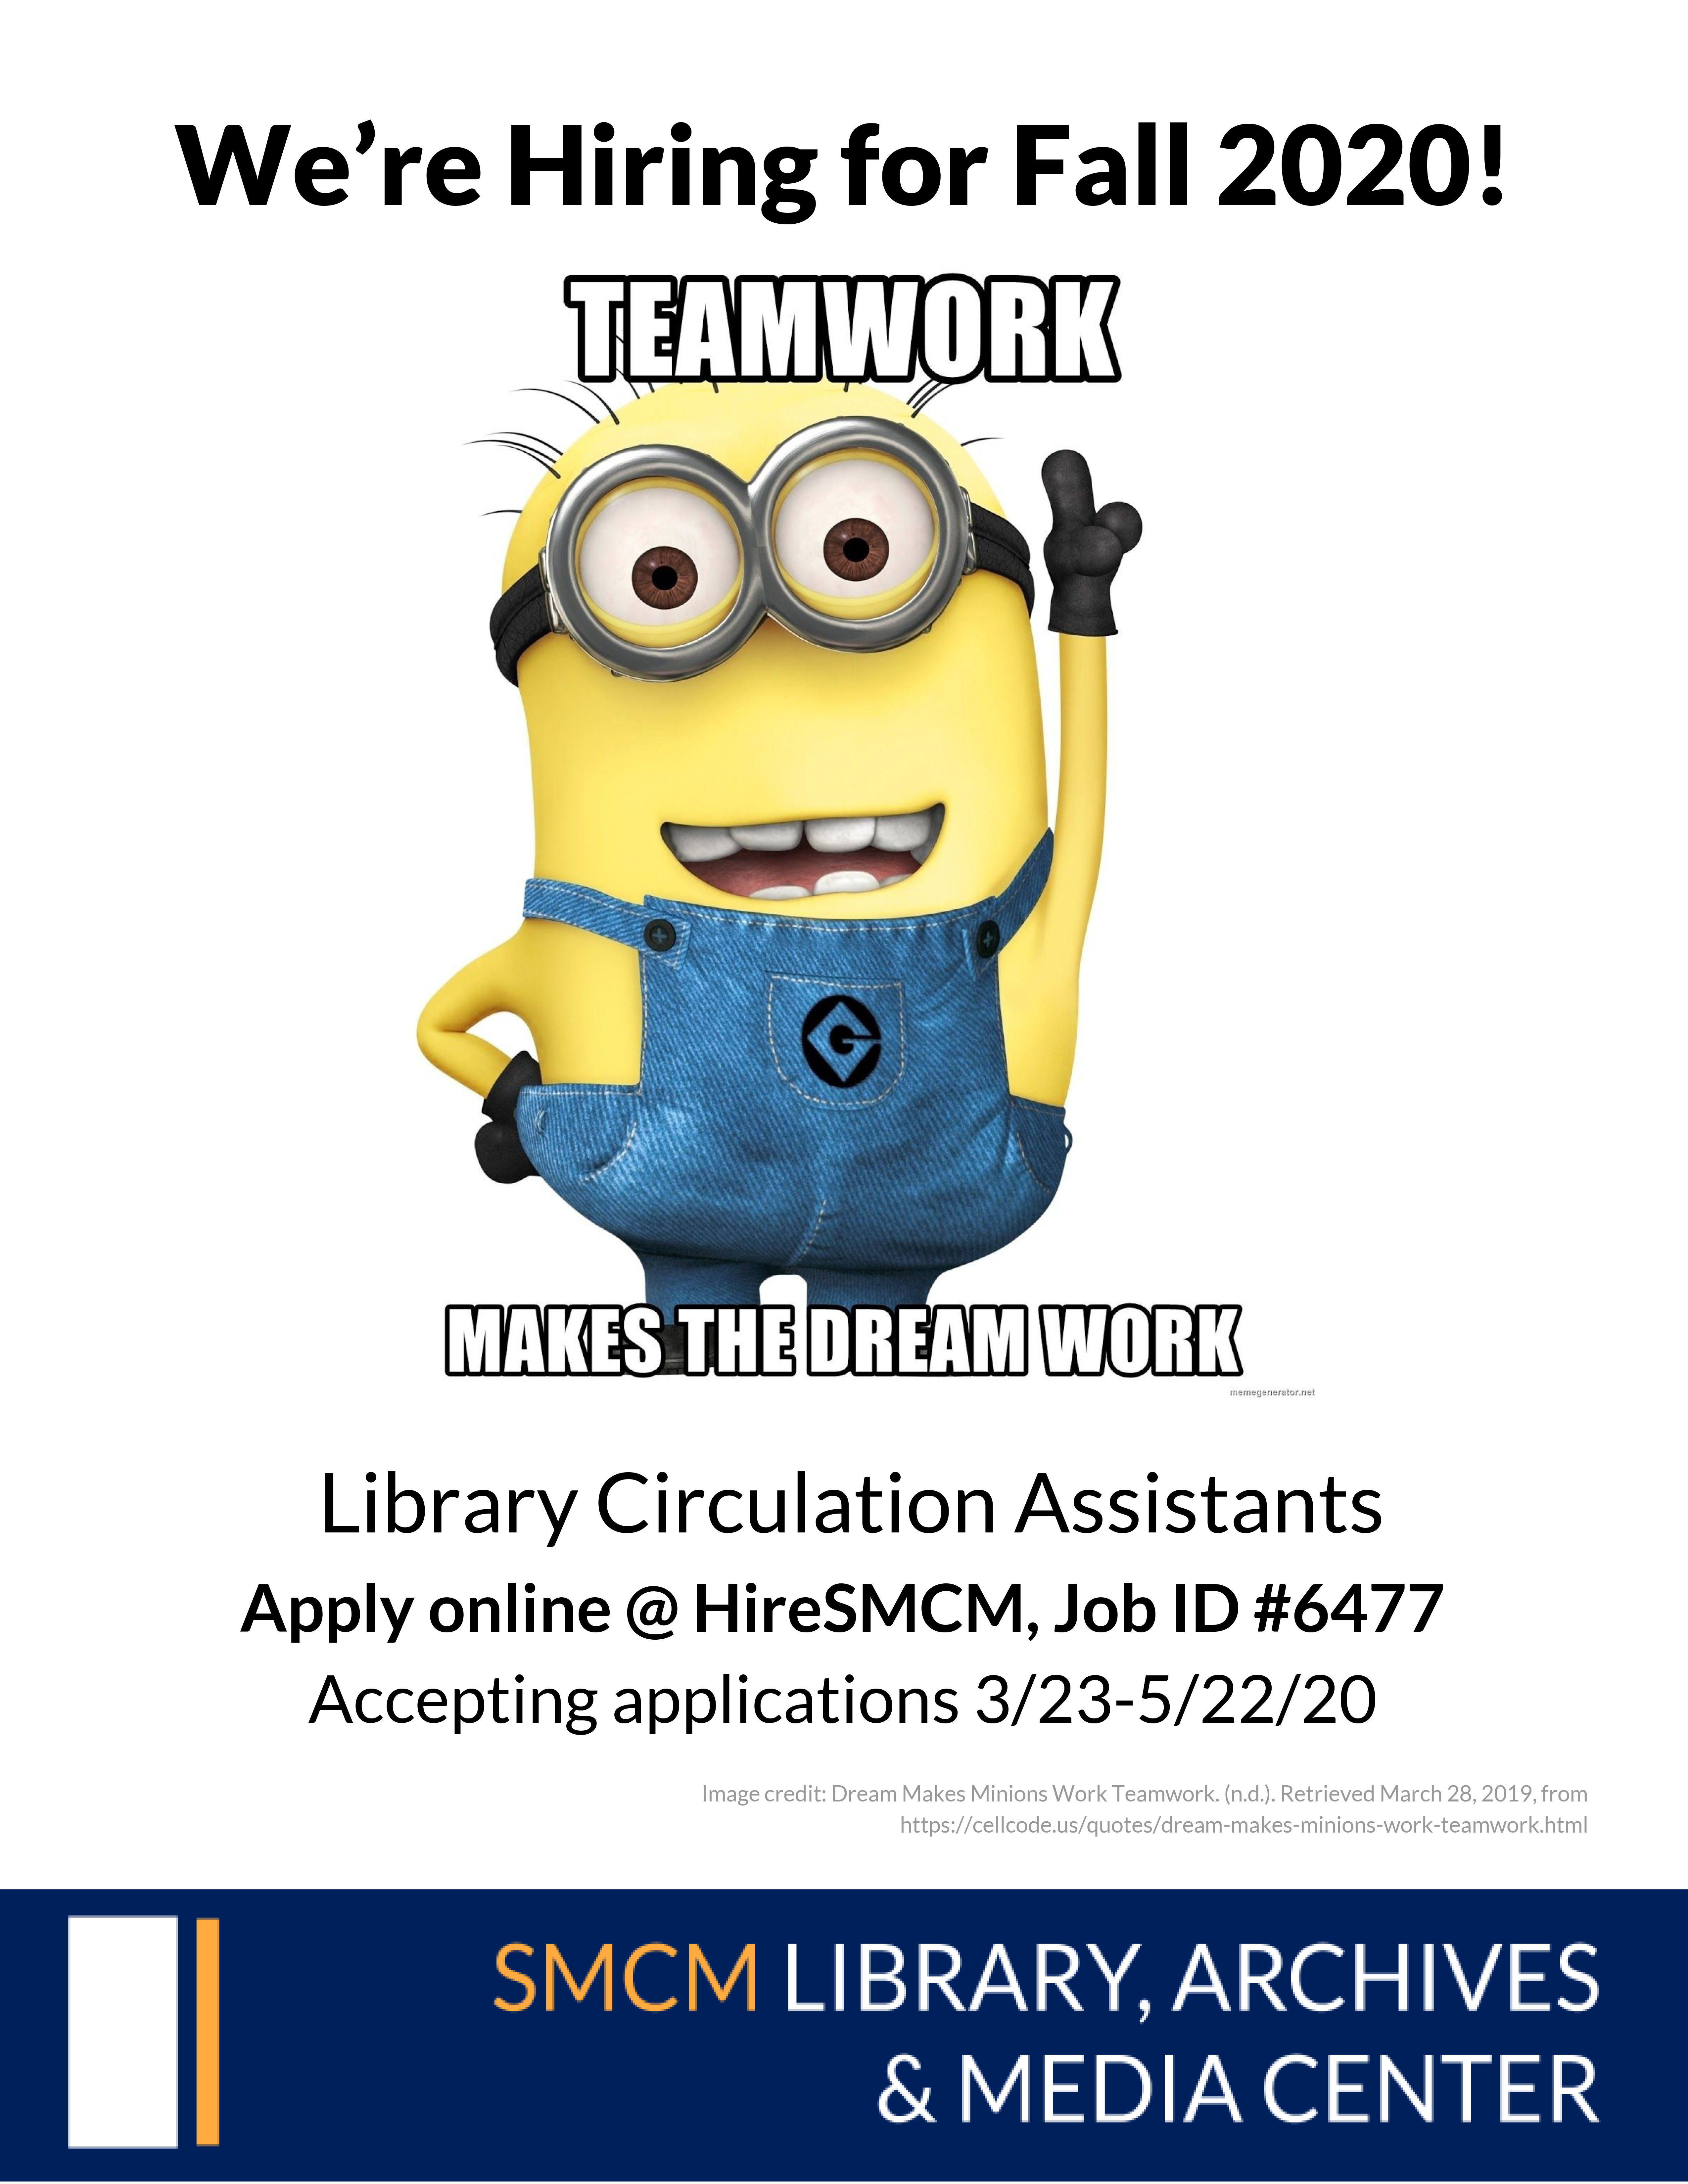 We're Hiring Library Circulation Assistants for Fall 2020. Visit HireSMCM and search for job posting # 6477.